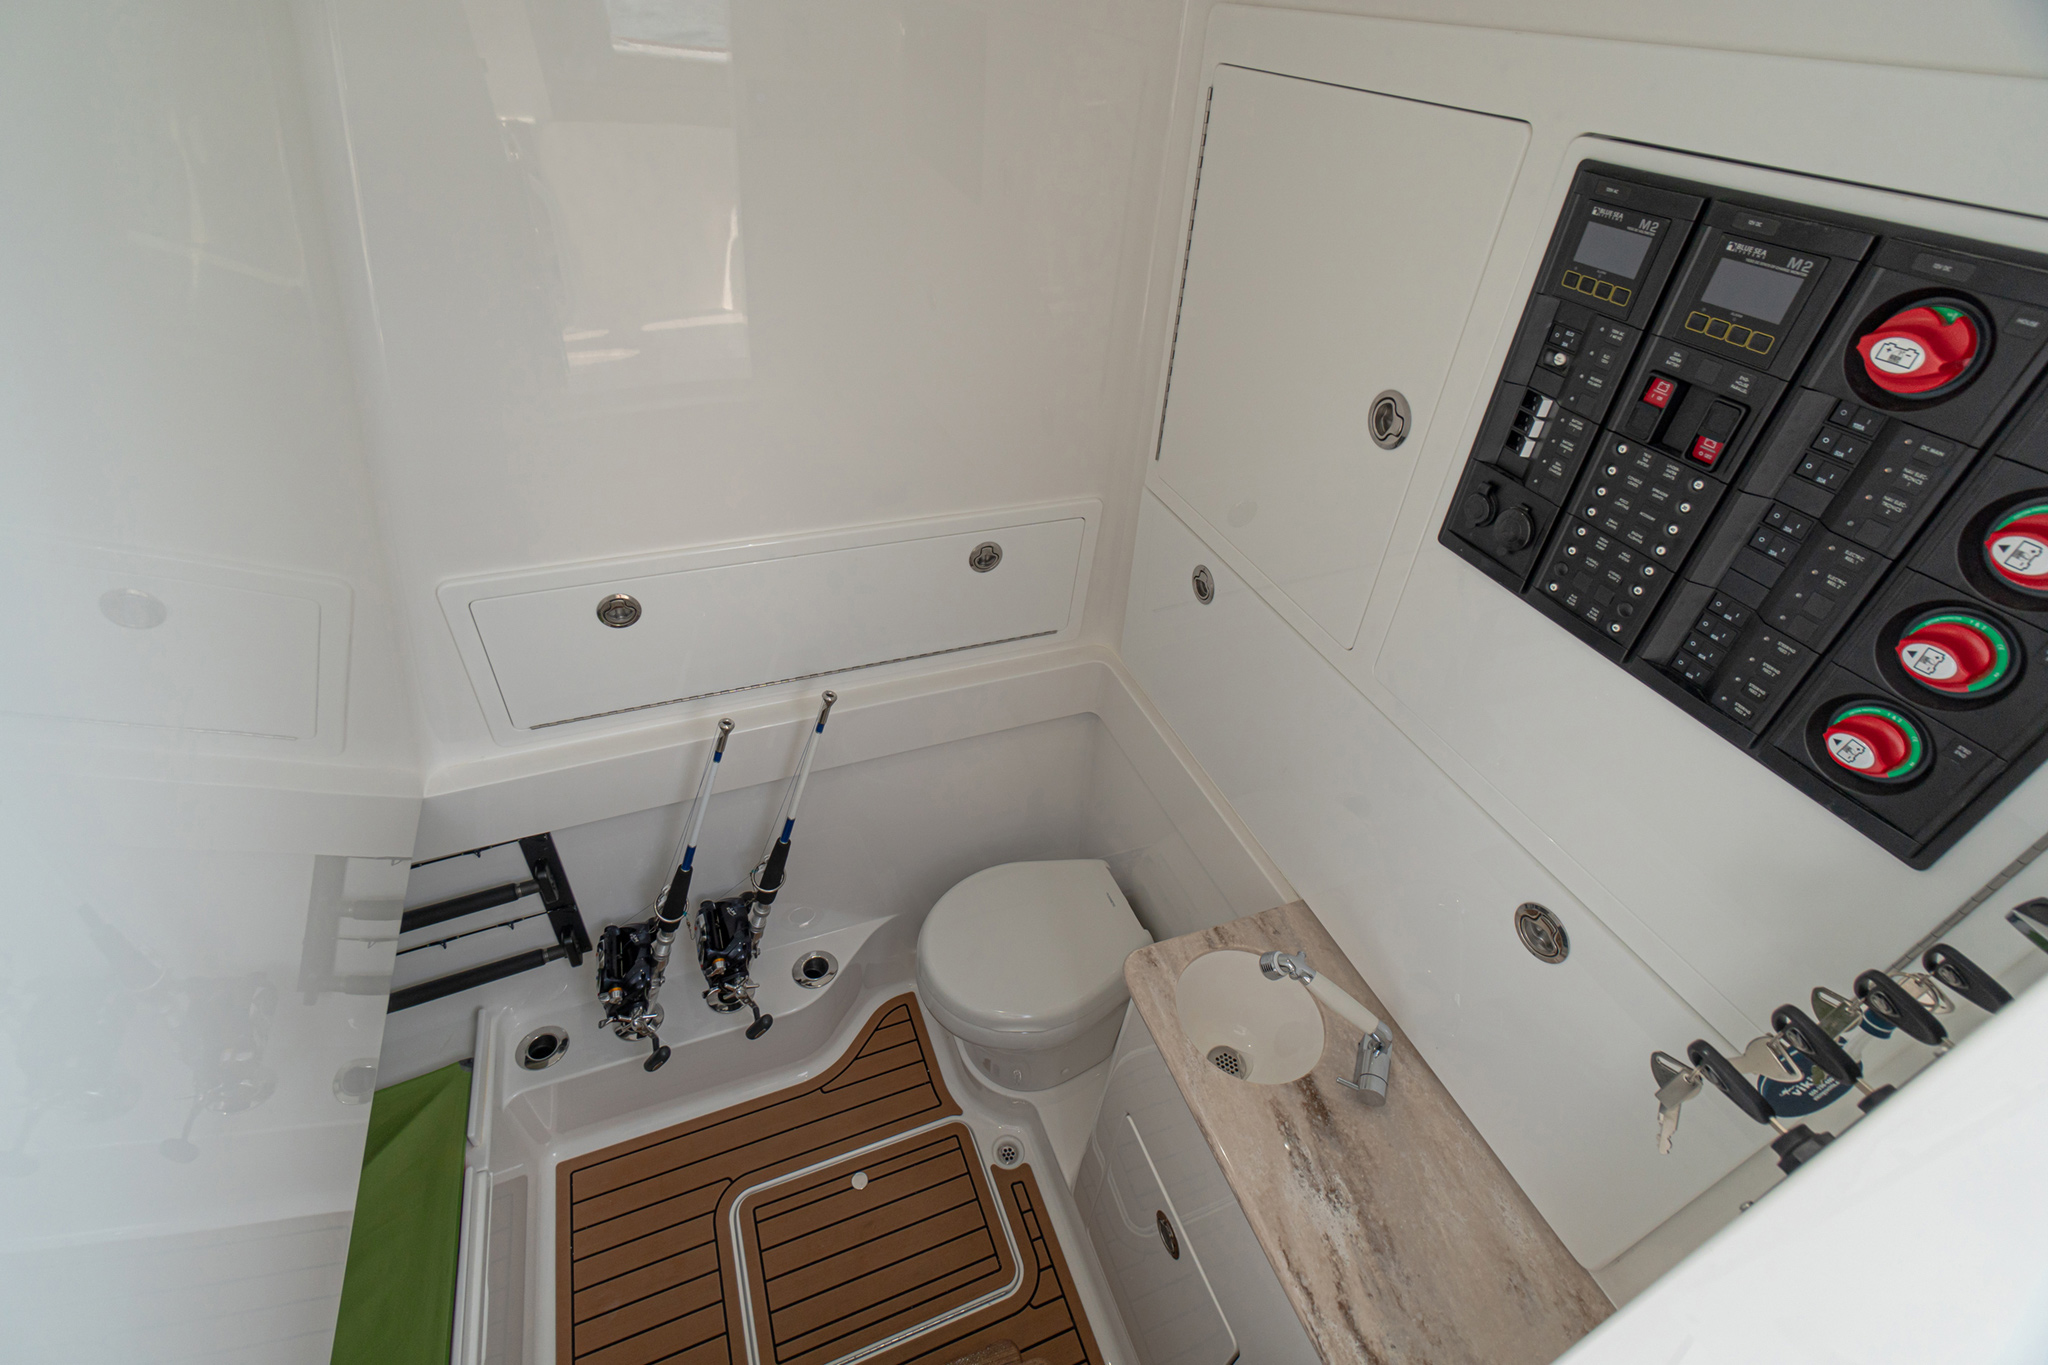 Console’s electric head, vanity with sink/shower wand, electrical panel, electronics access, available SeaDek floor.